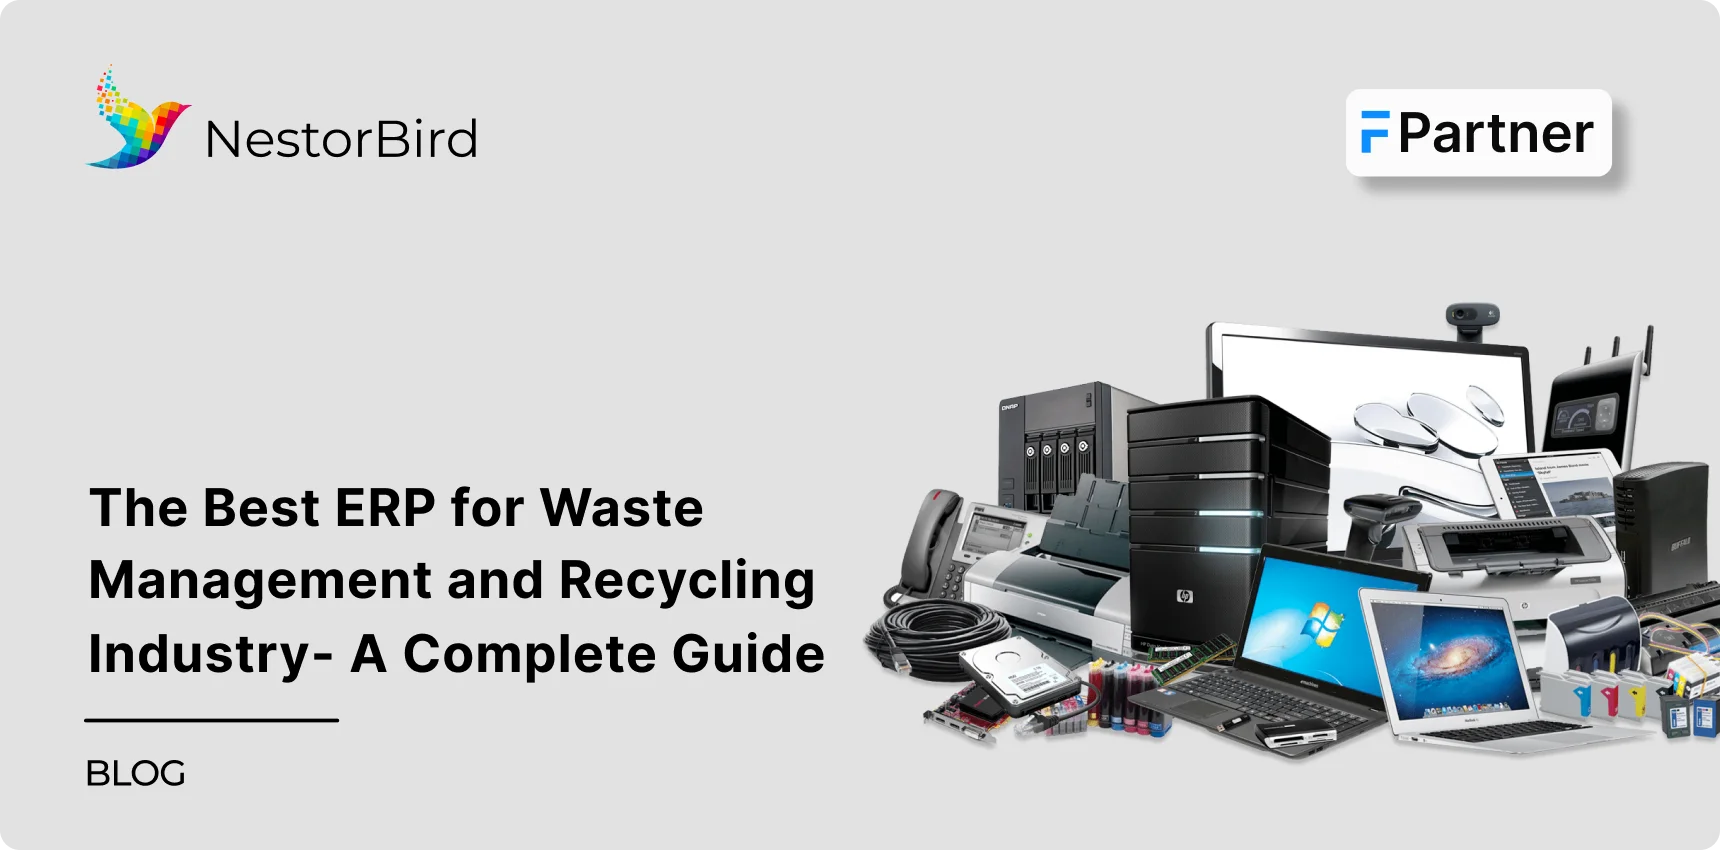 The Best ERP for Waste Management and Recycling Industry- A Complete Guide